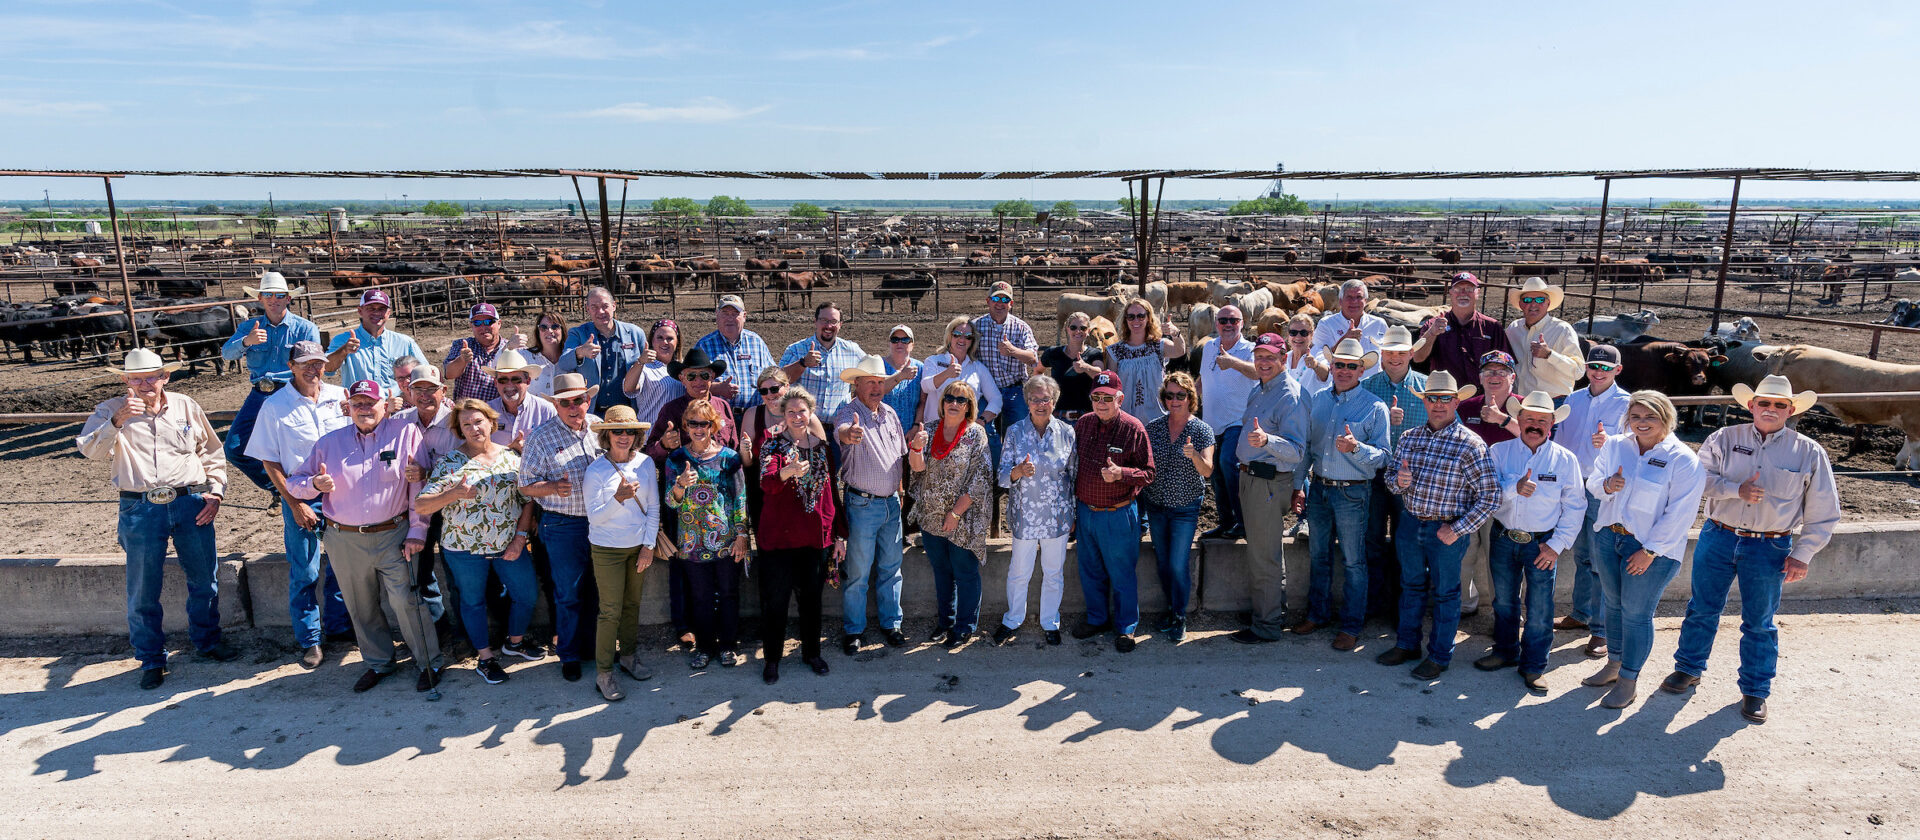 A group of men and women stand together in front of a feed yard with cattle in the background.